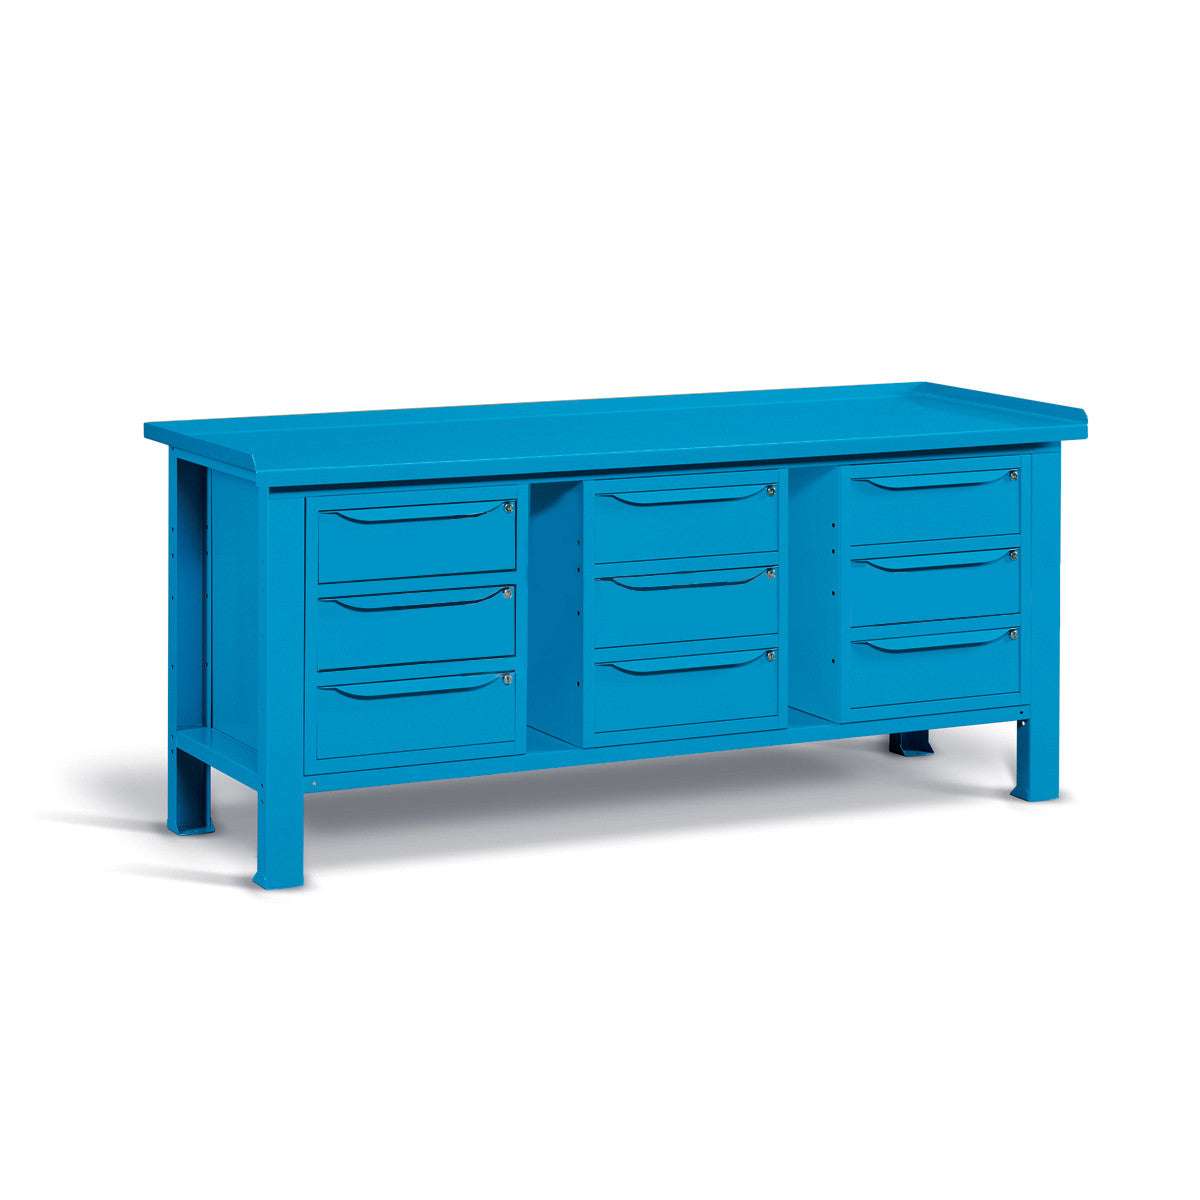 WORKSHOP WORKBENCH STEEL TOP 2007 x 705 x 855 H - 3 CABINETS 3 DRAWERS - FAMI - BLUE